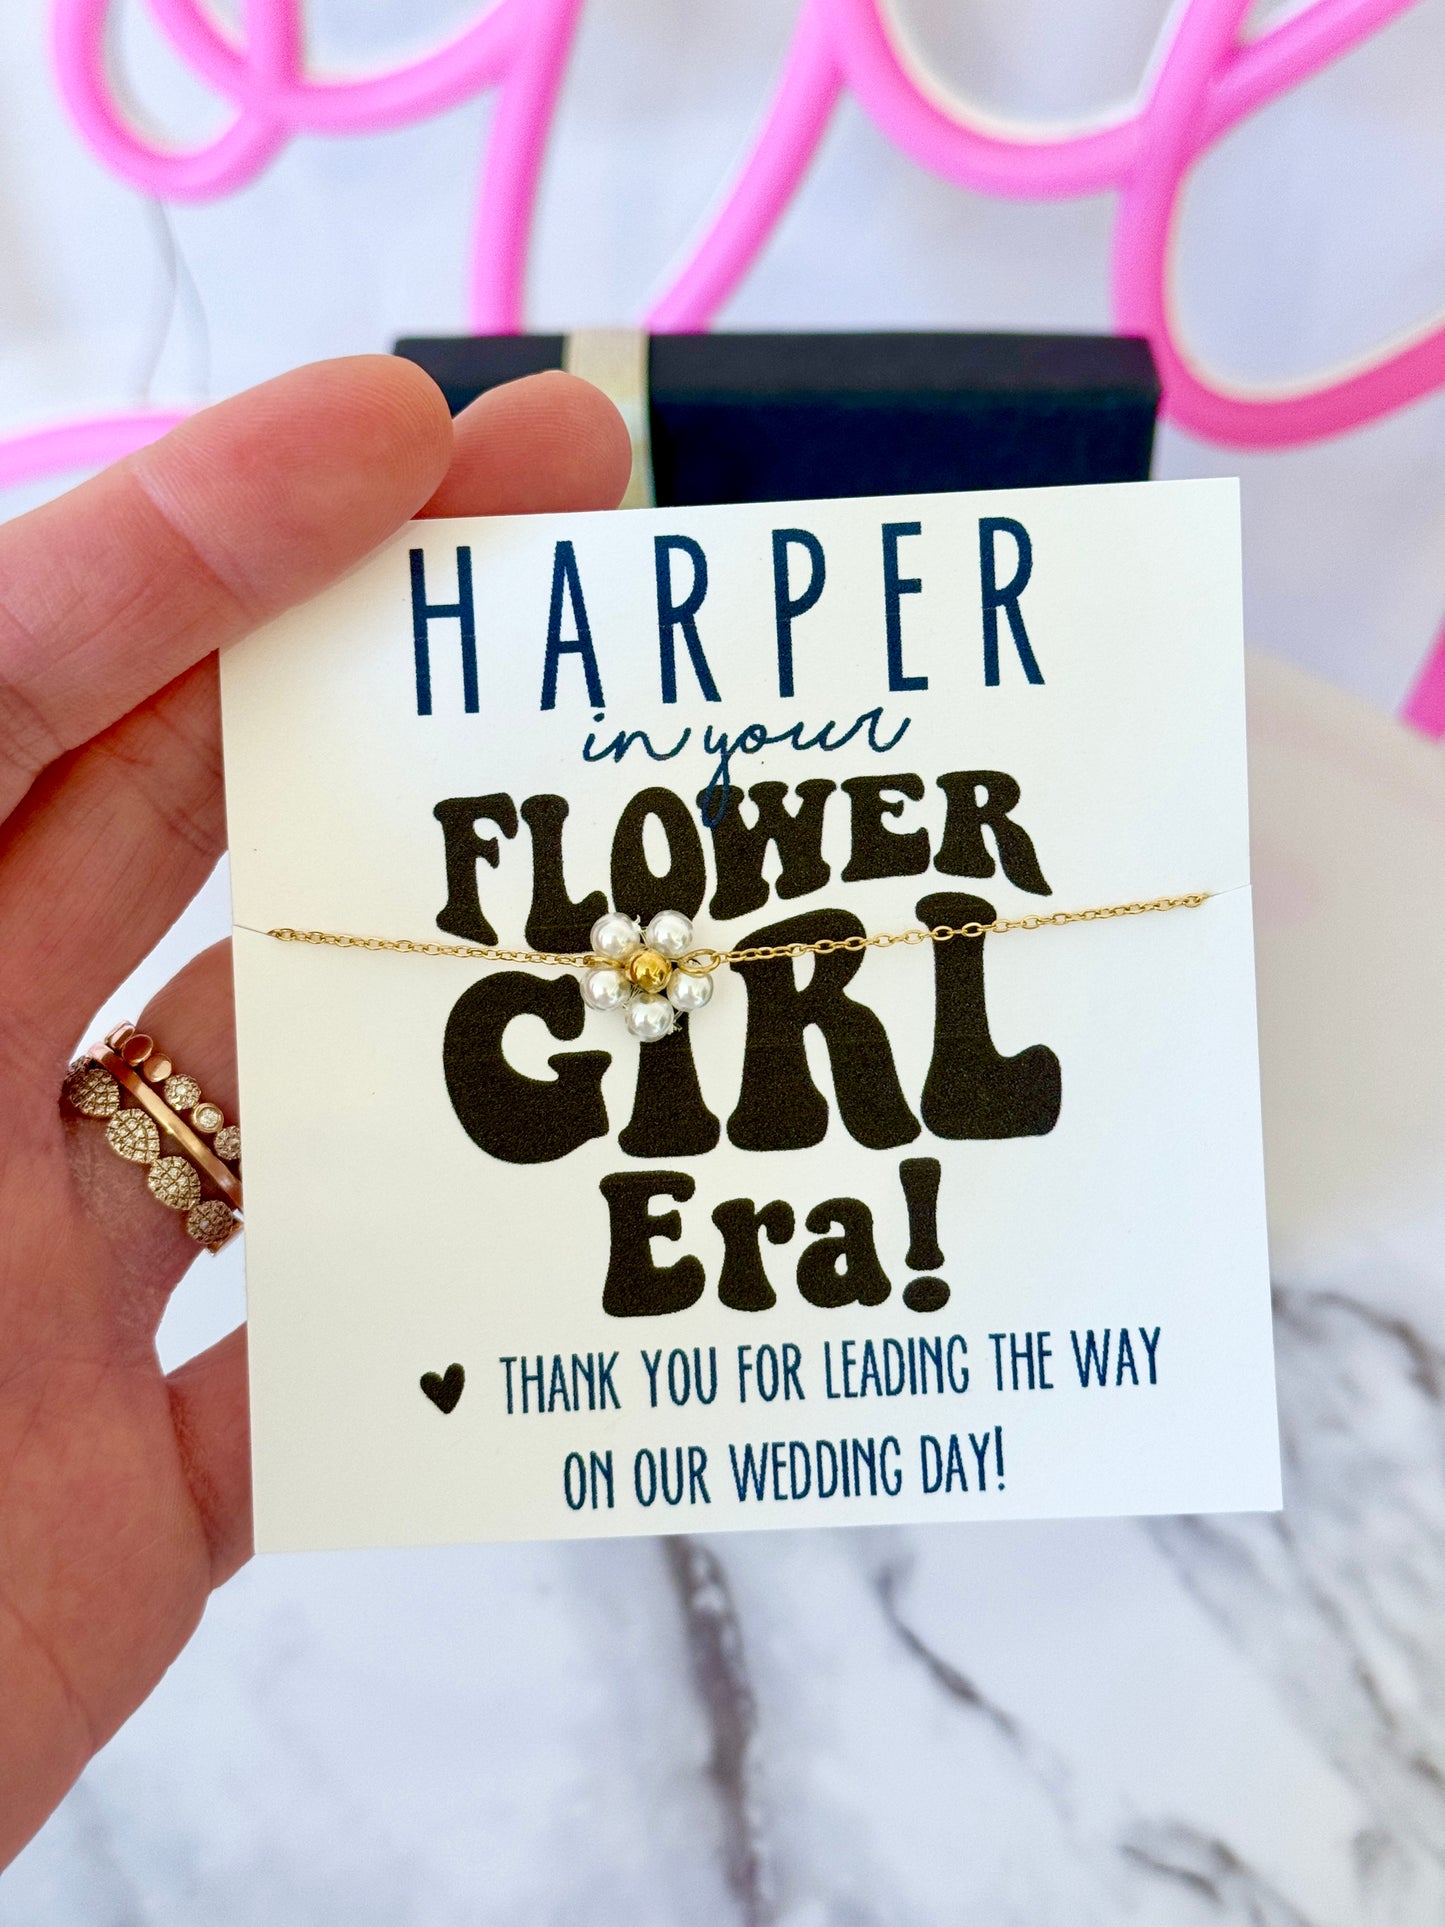 In my Flower Girl Era Necklace! Flower Girl gold & Pearl flower thank you necklace! Card, Box+Ribbon included, NON-TARNISH, hypoallergenic!